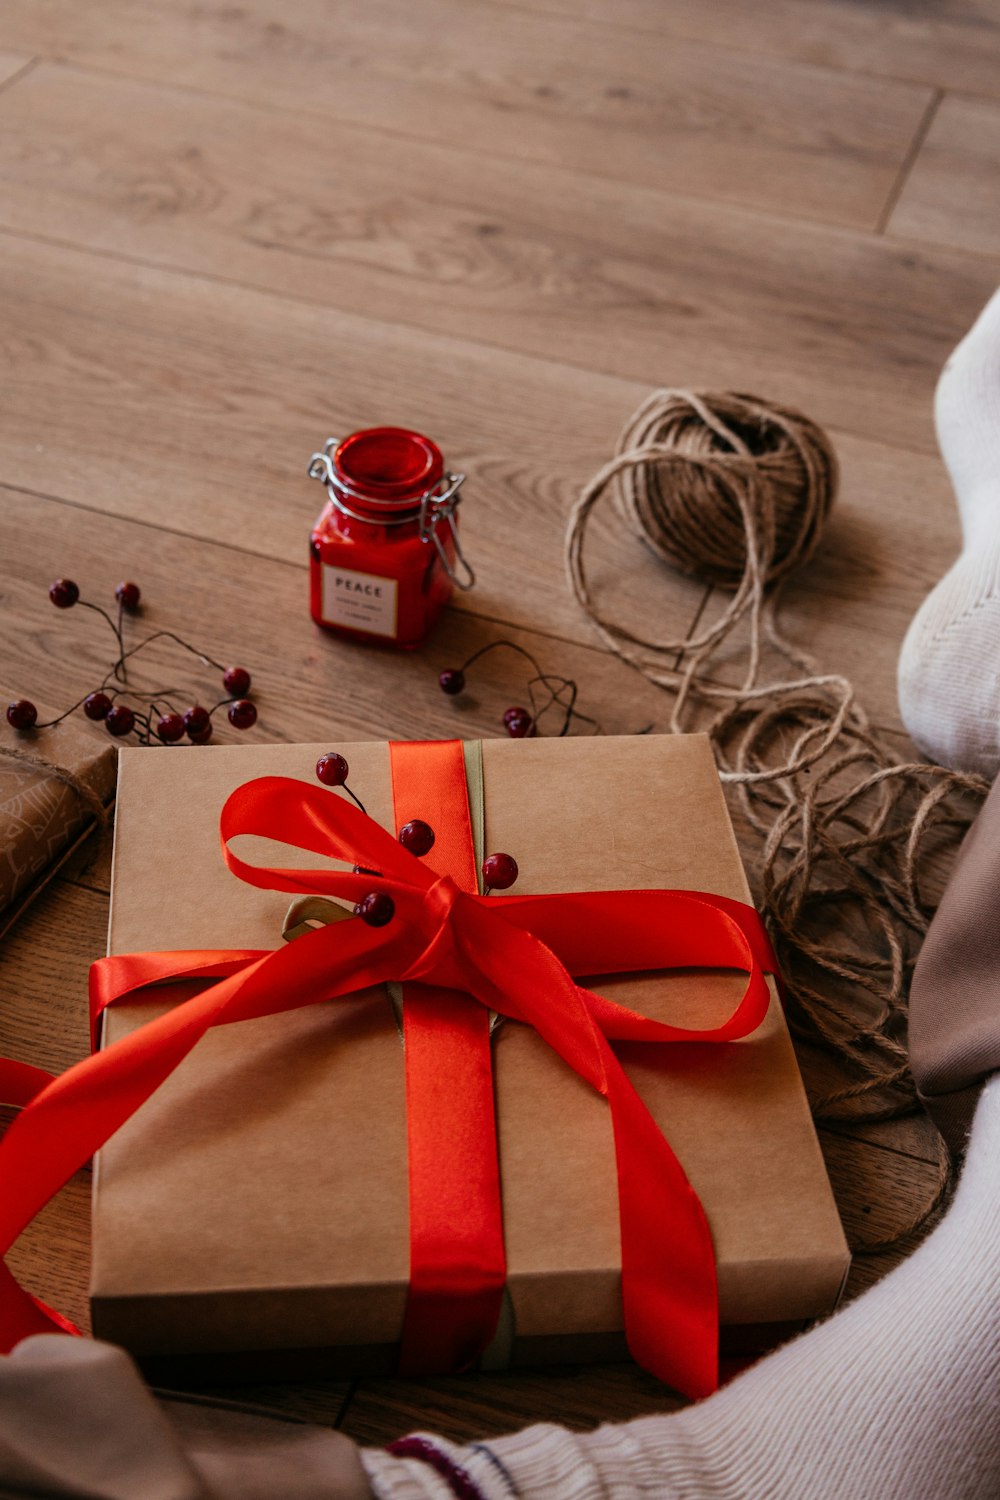 a wrapped present sitting on the floor next to a jar of jam